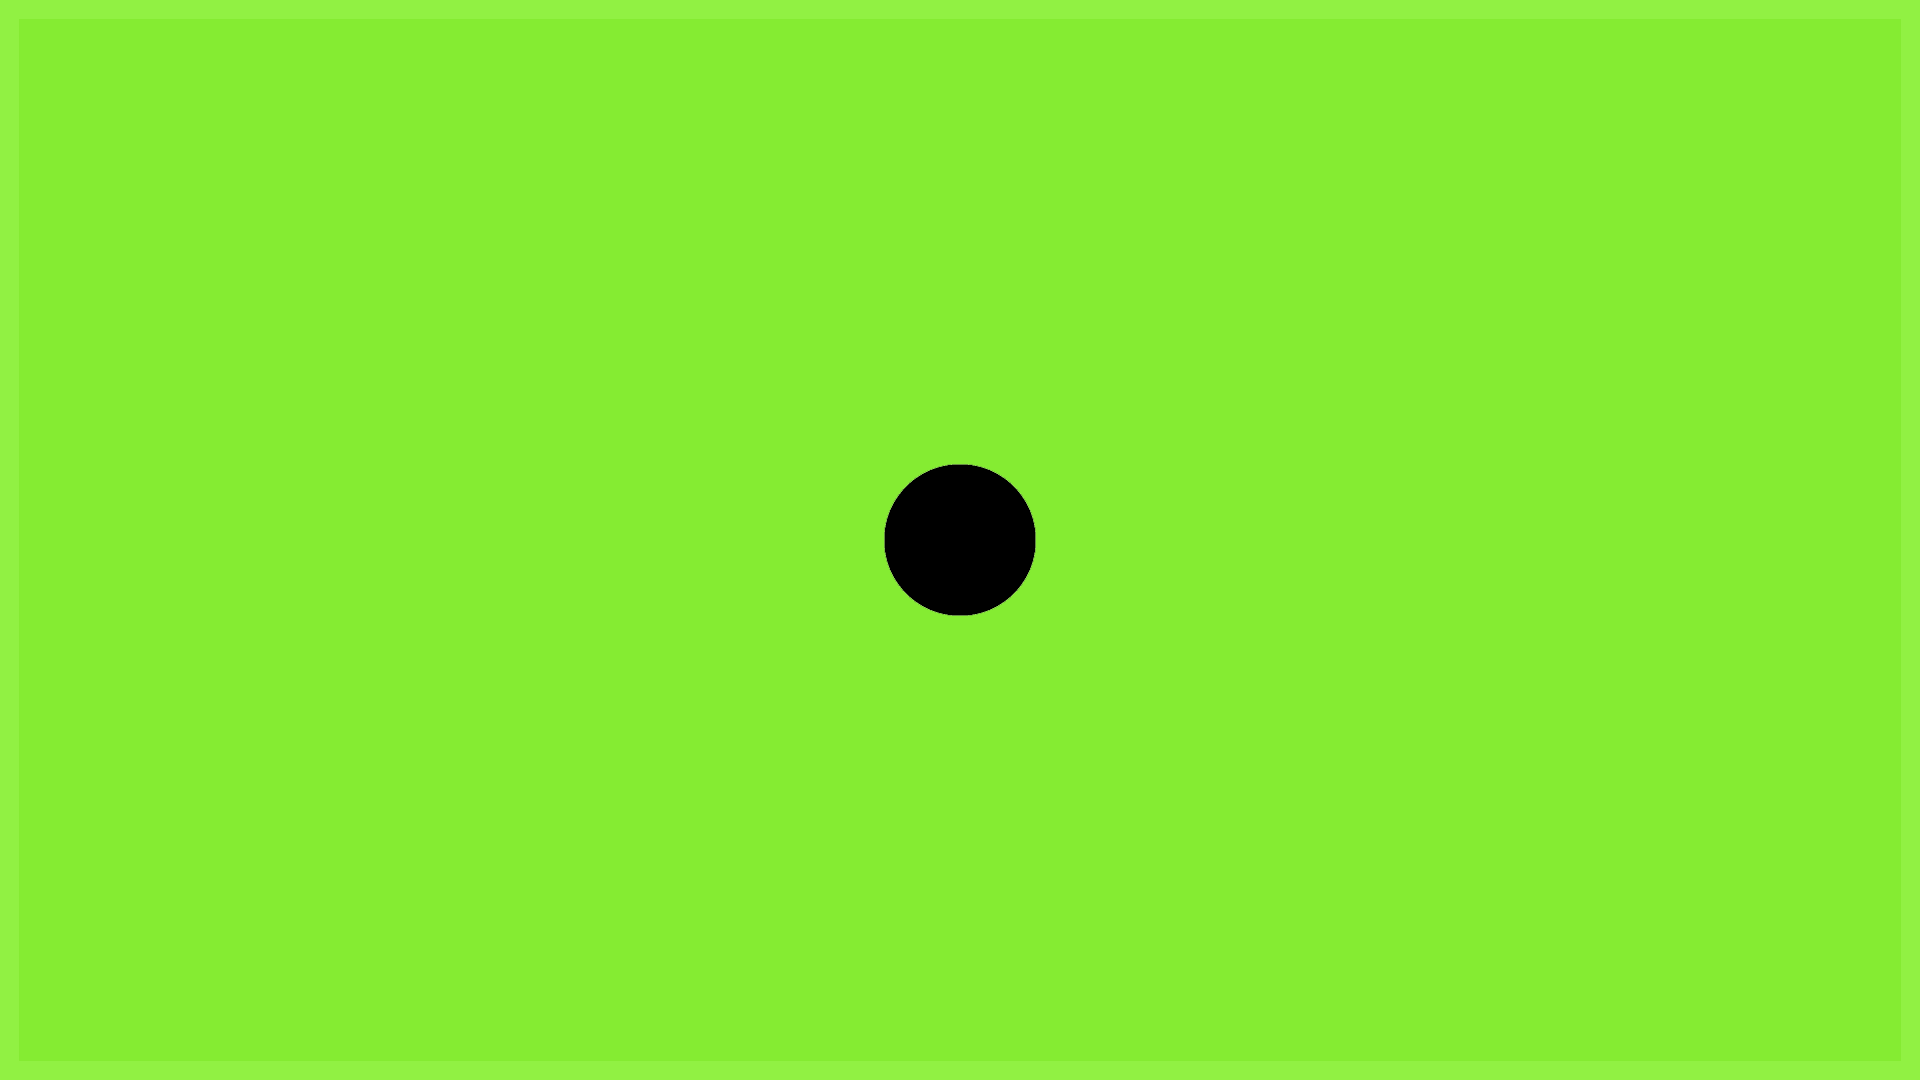 General 1920x1080 minimalism simple background green background dots circle